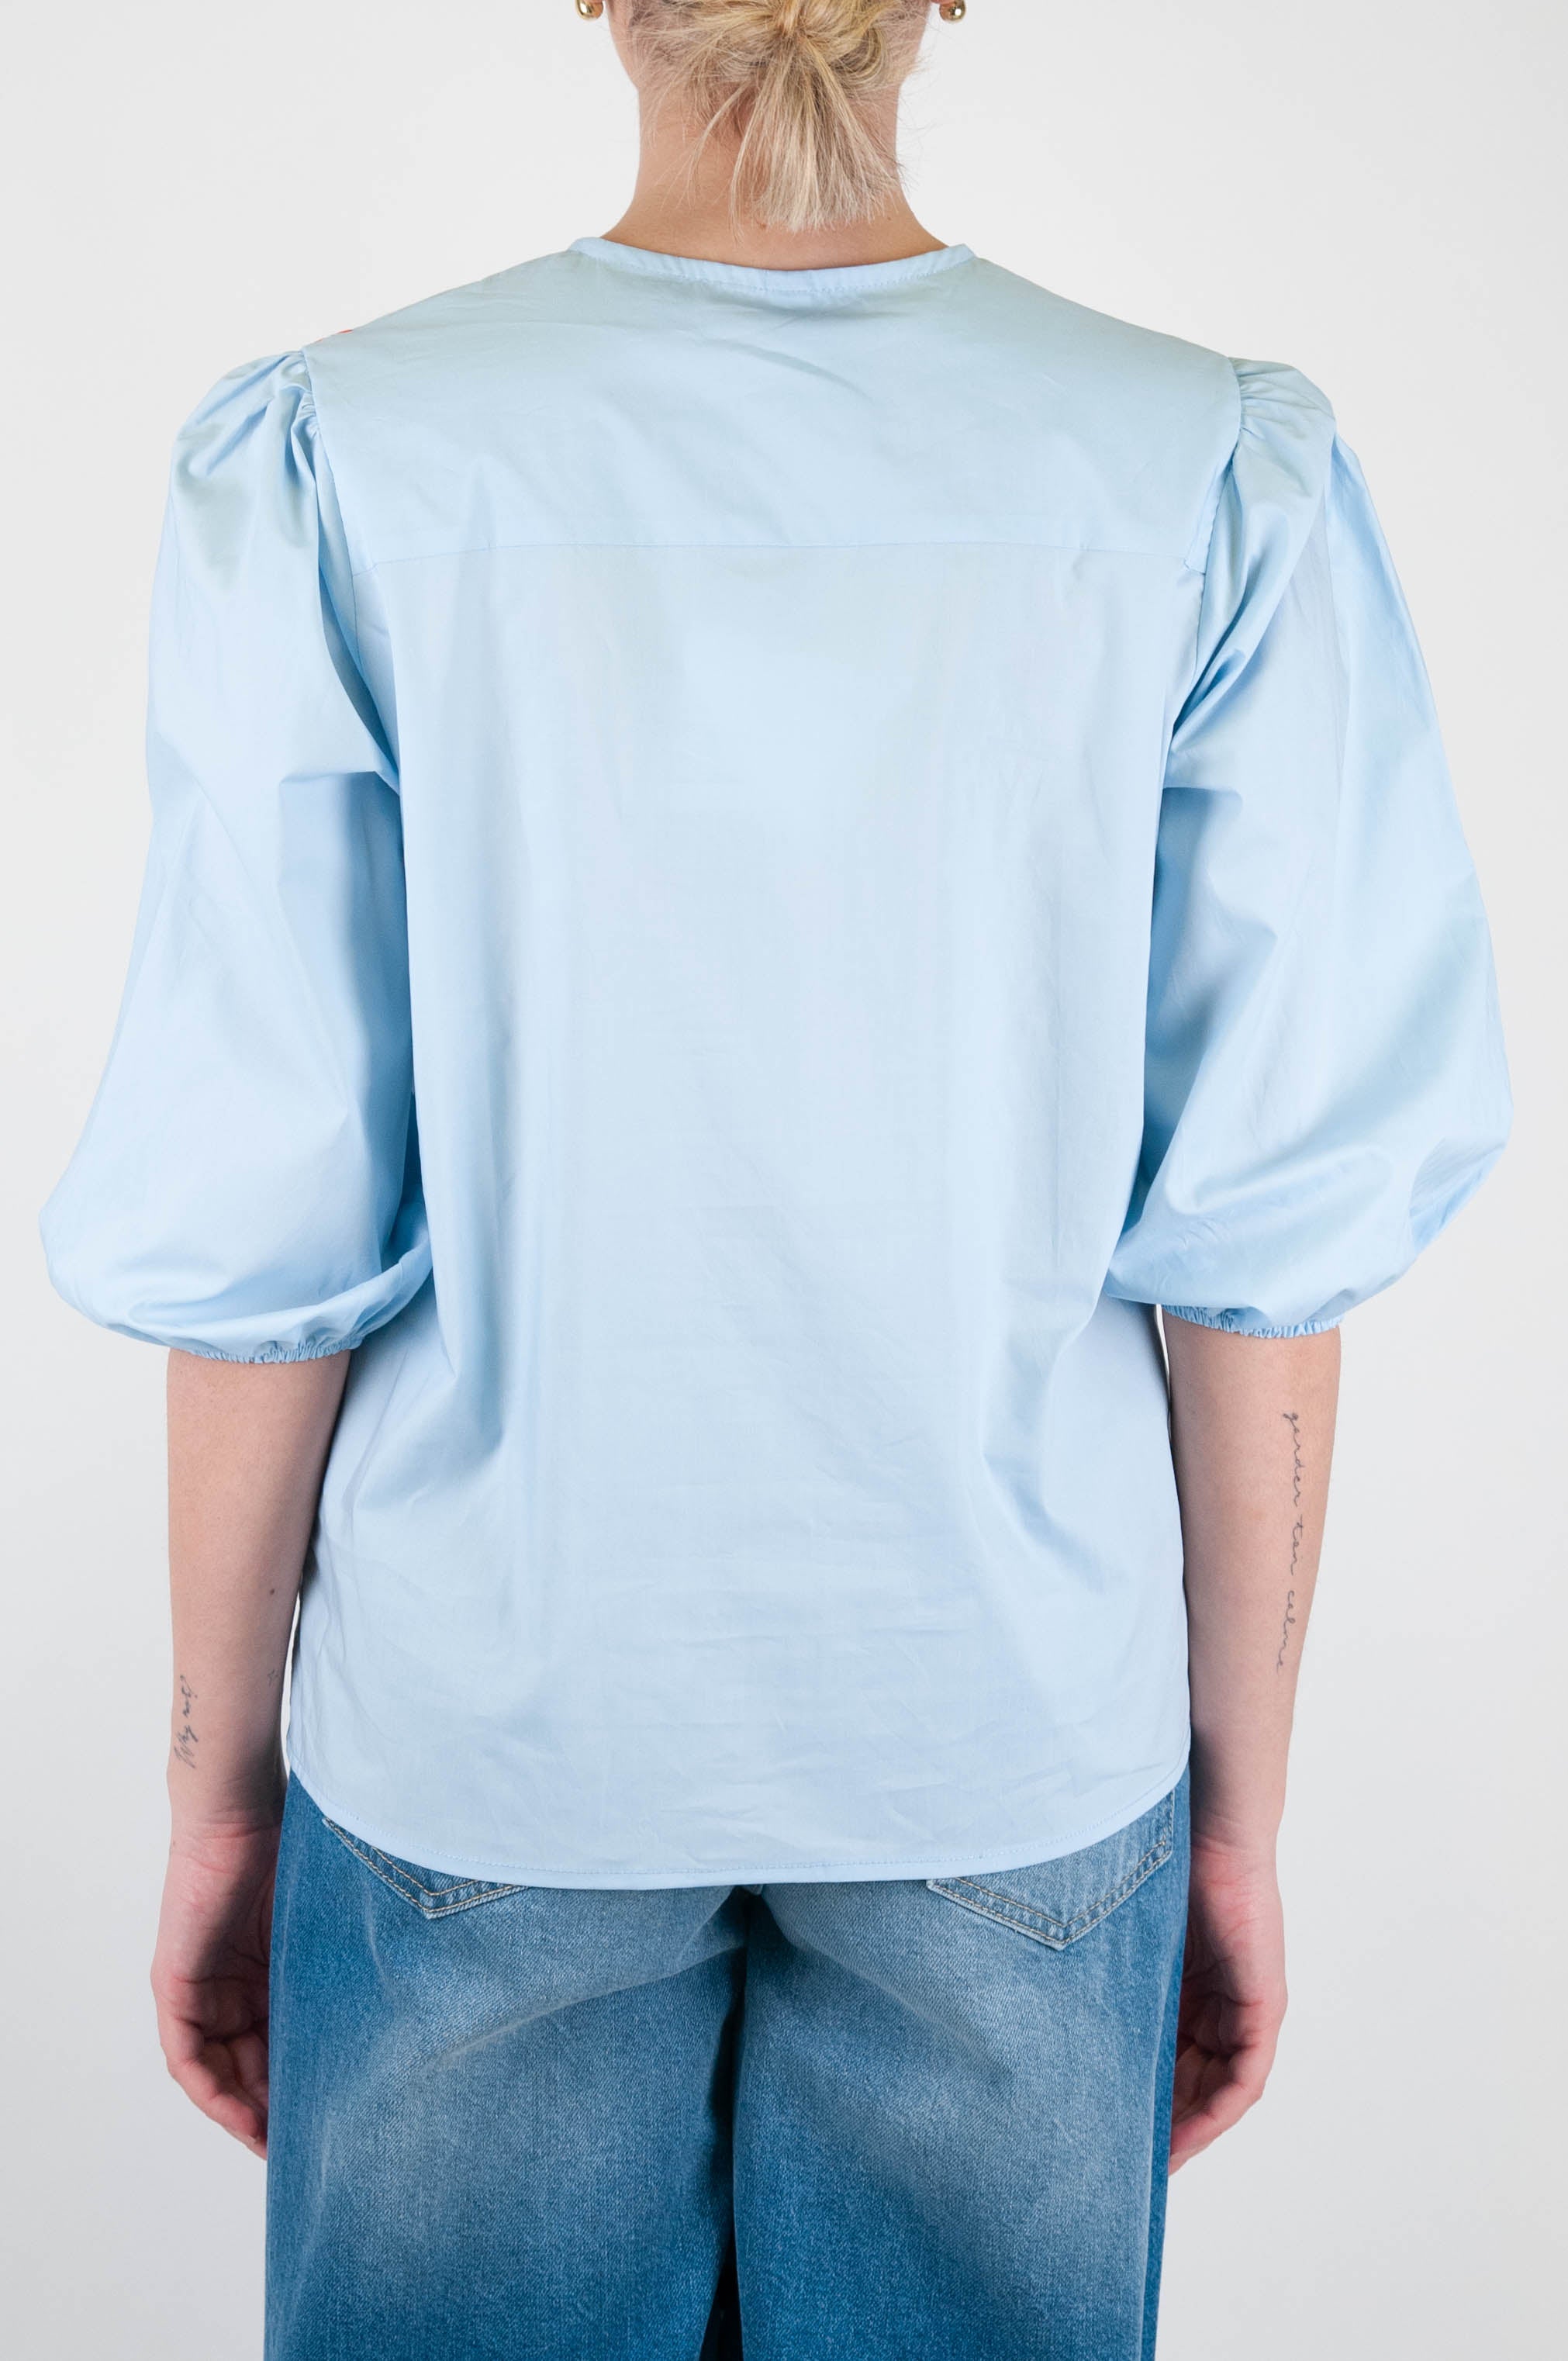 Tension in - Shirt with diagonal contrasting embroidery and three-quarter balloon sleeves